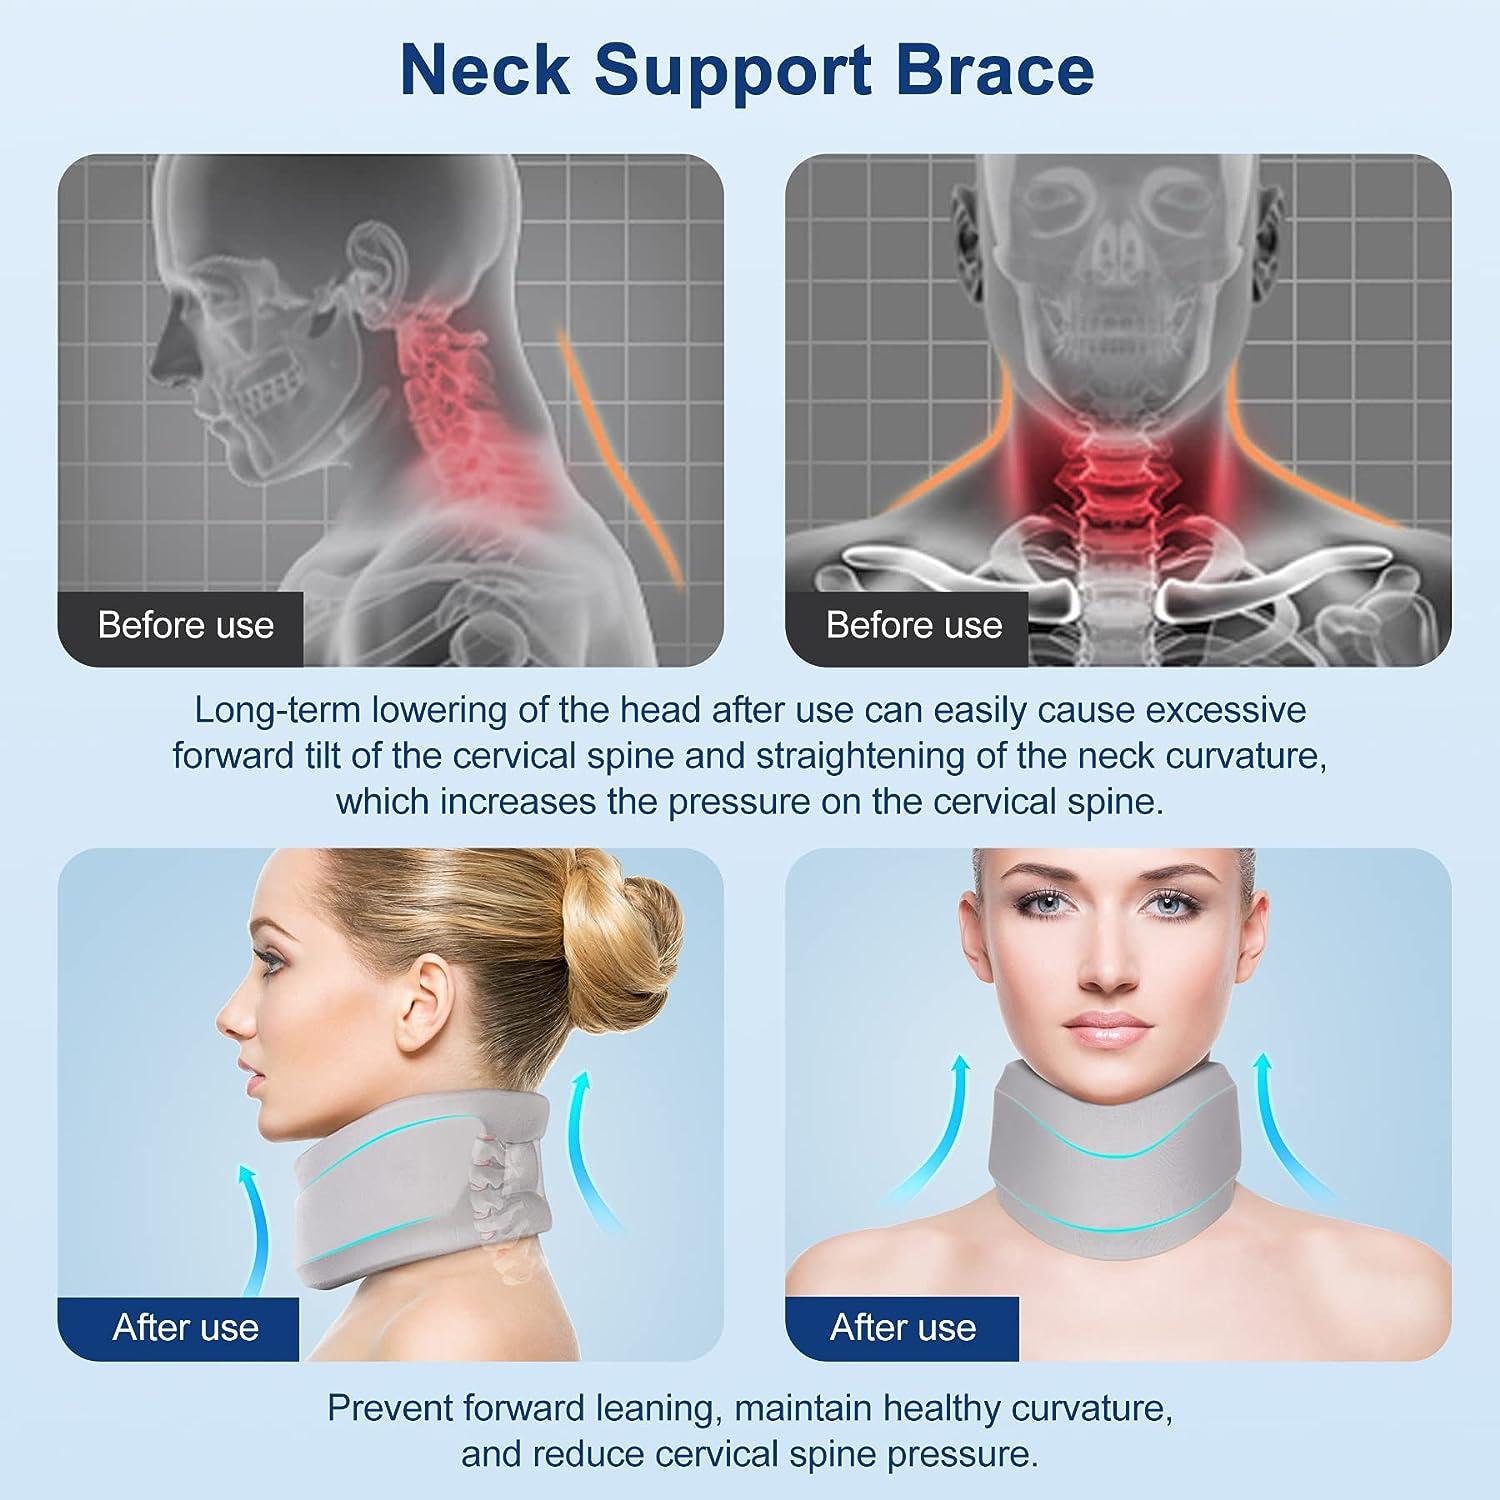 Neck braces to stabilise the cervical spine